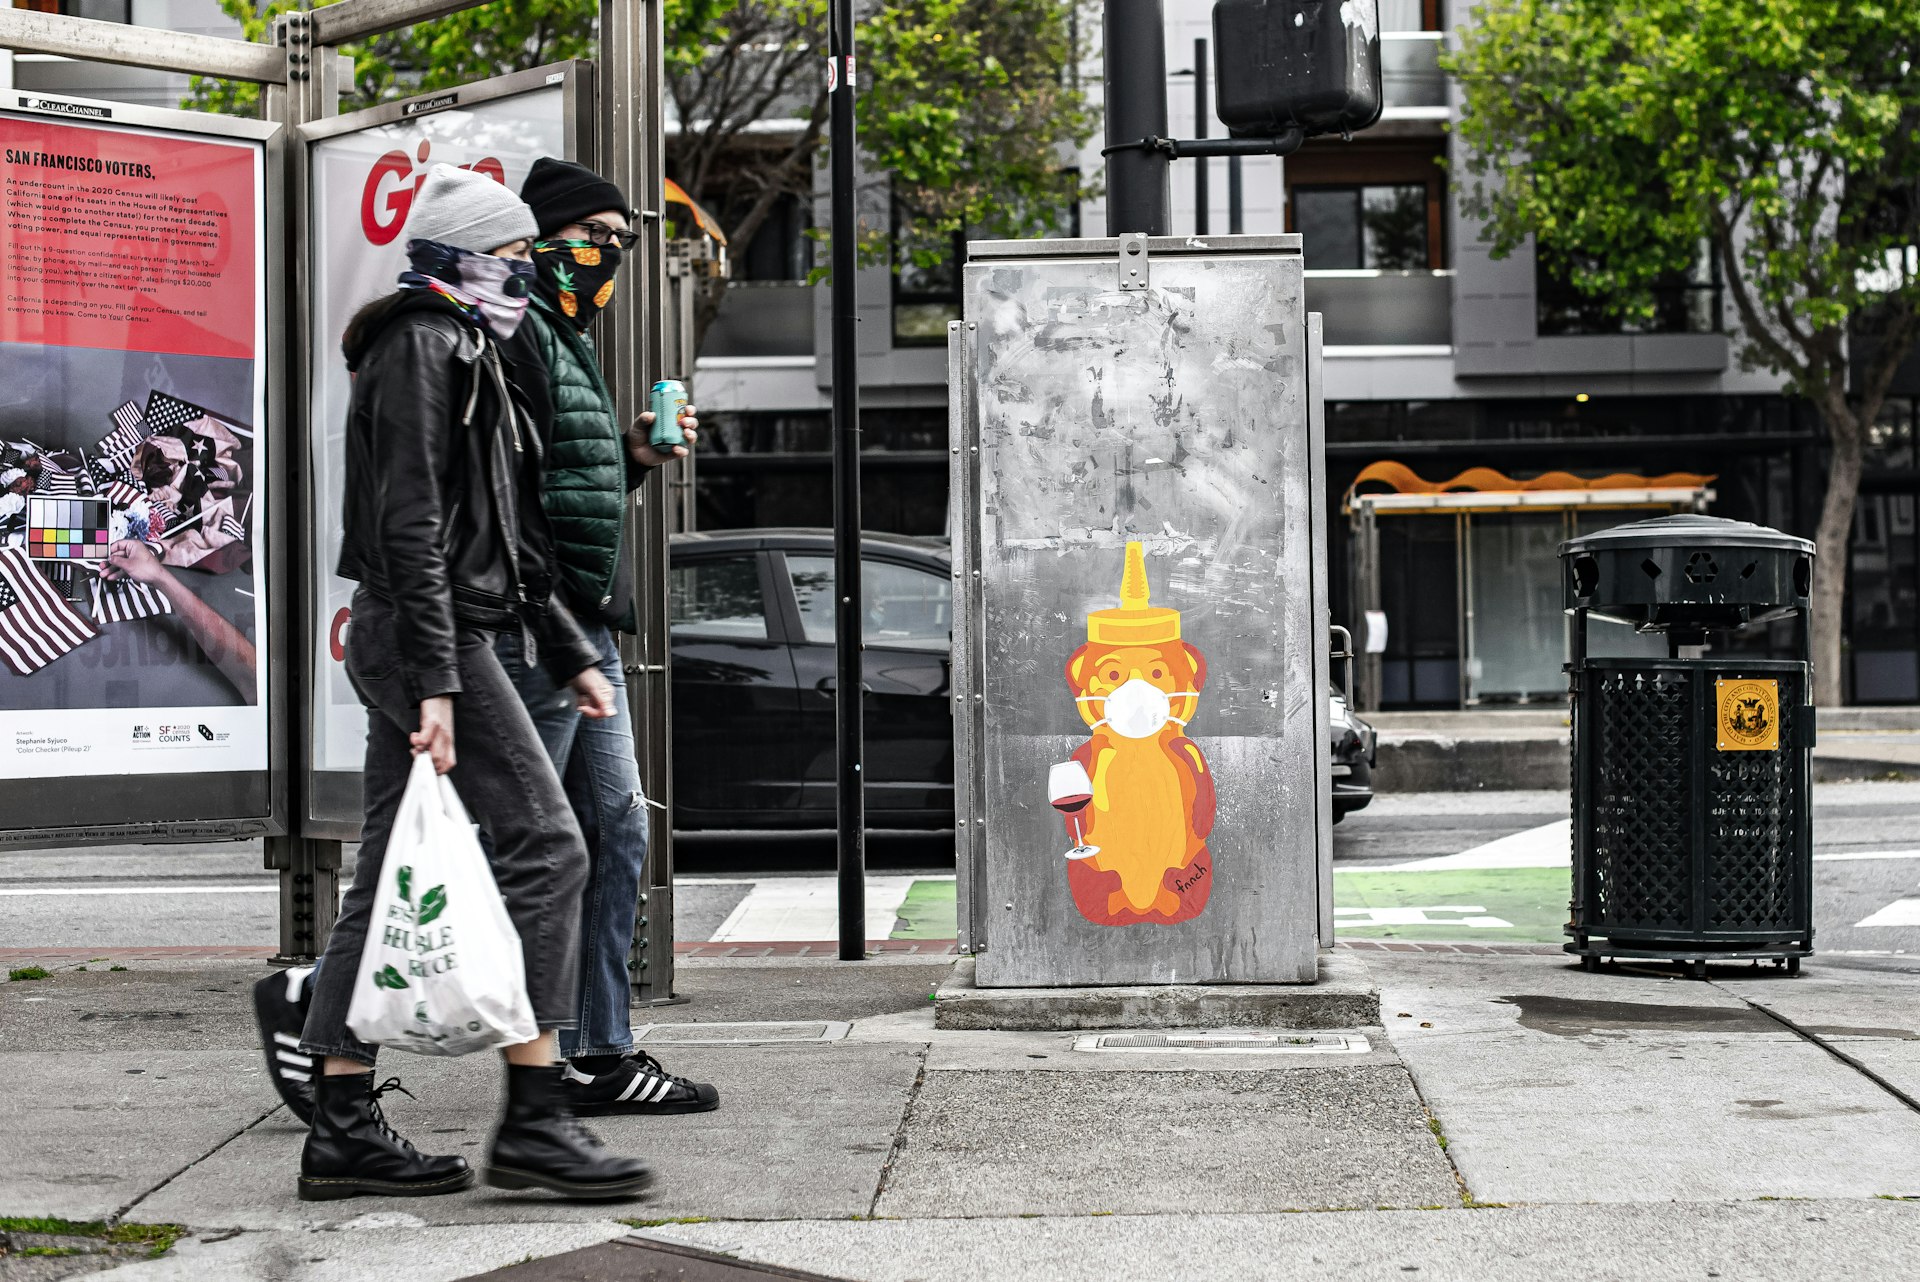 A Wine Bear by fnnch on a mailbox in San Francisco, with two people walking by